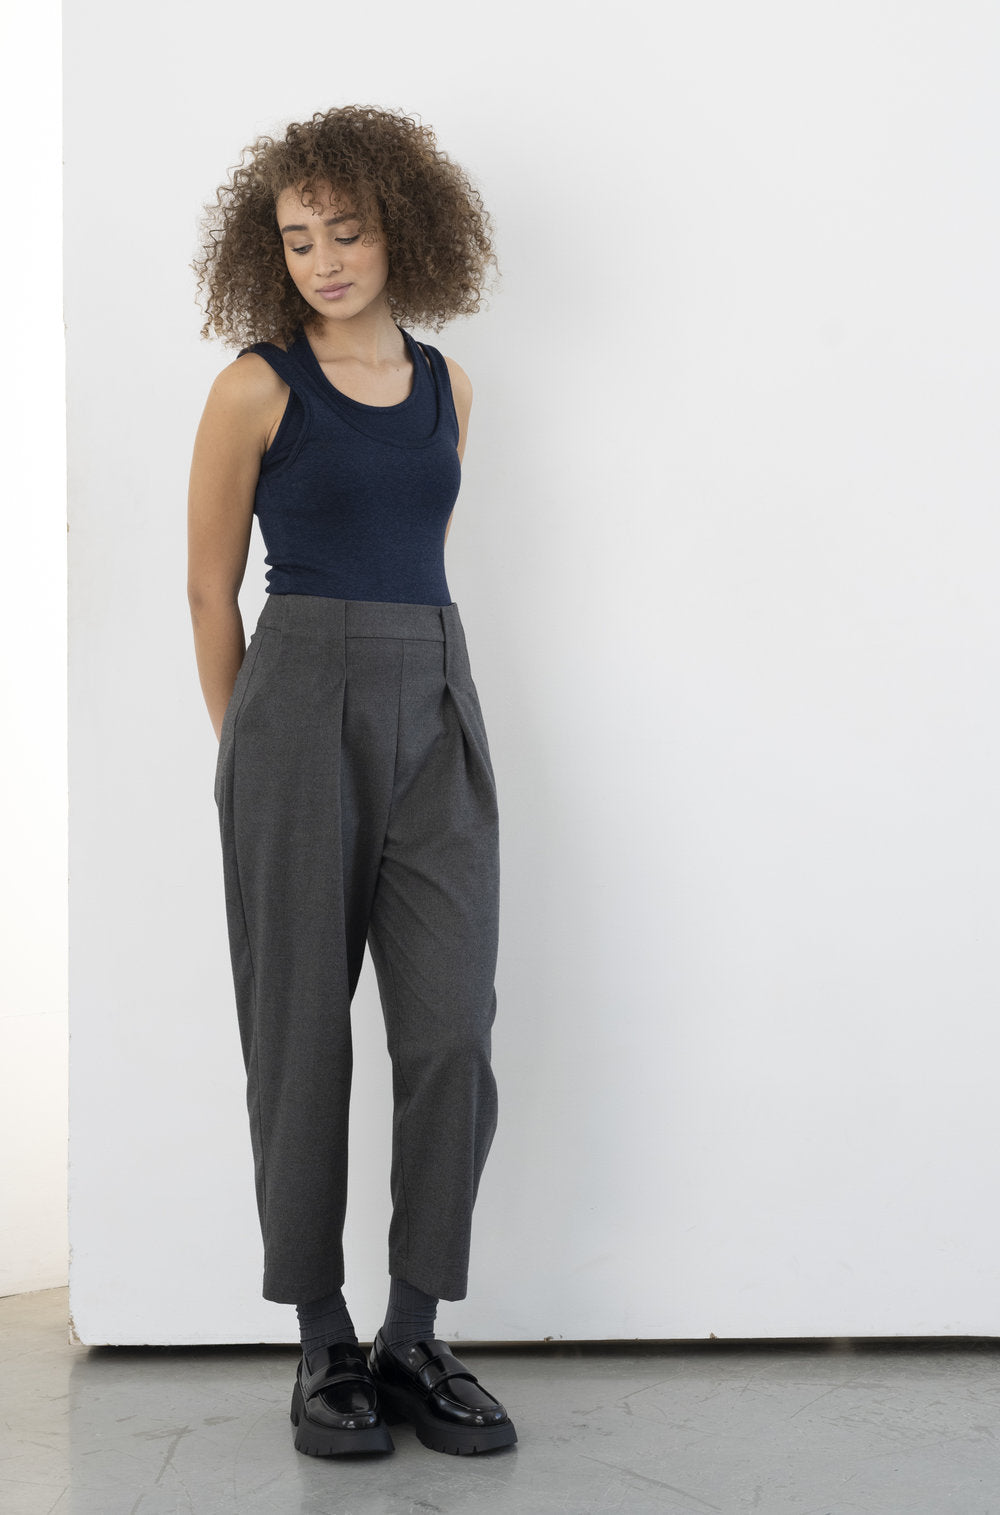 The Olden Pant in charcoal by BODYBAG by Jude is a high-waisted, carrot-style pant with two pleats on each side at the front, an invisible zipper on the side, and one back pocket. lemon cyprus boutique